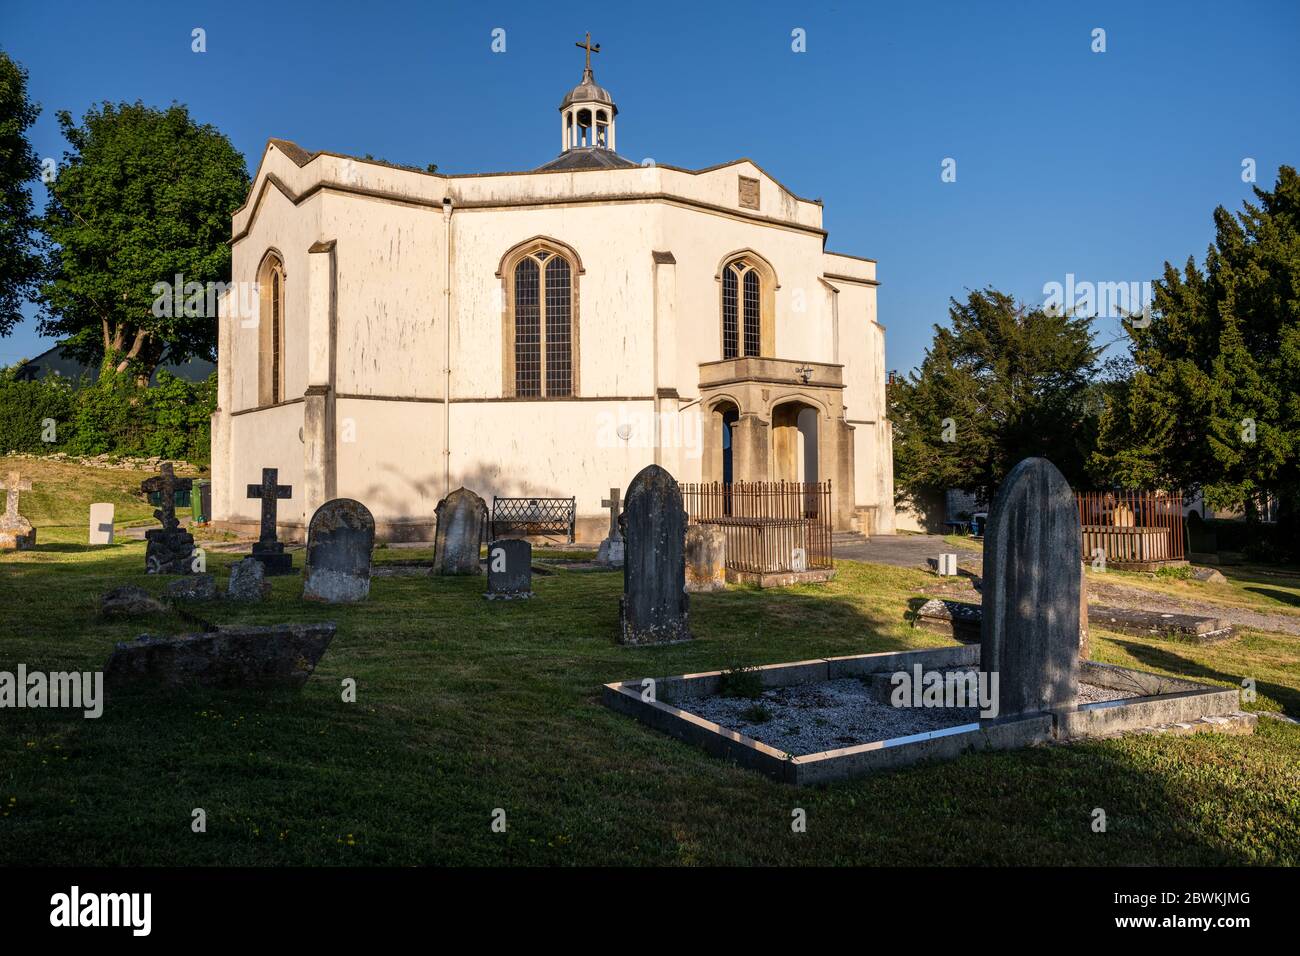 Wedmore, England, UK - May 31, 2020: Sun shines on Holy Trinity Church in the village of Blackford in Wedmore, Somerset. Stock Photo